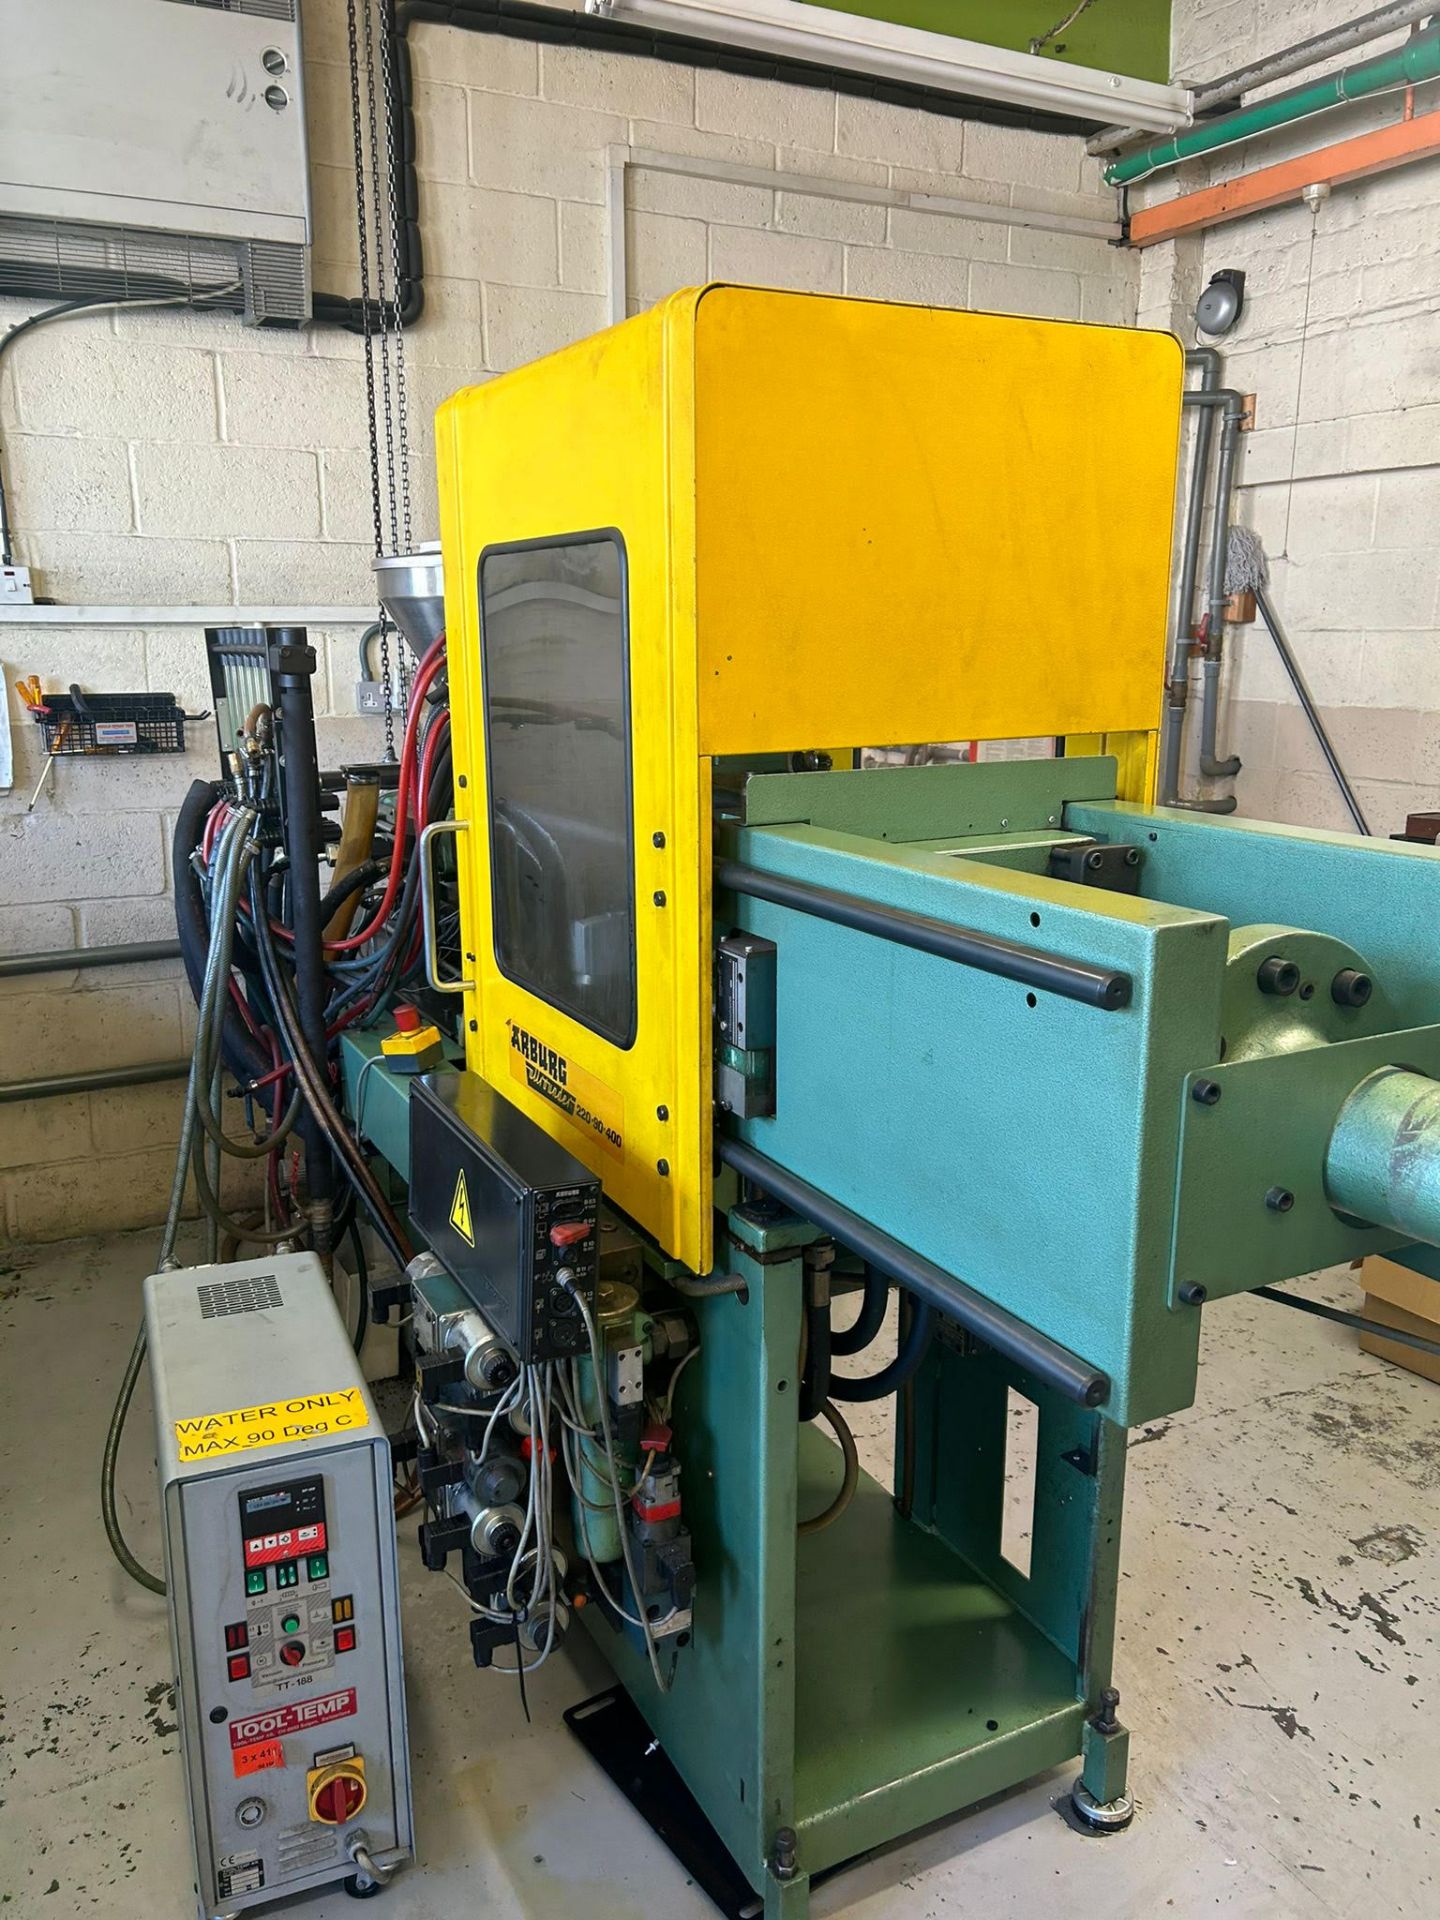 Arburg 220-90-400 injection moulding machine and Tool-temp temperature control unit - Image 6 of 11